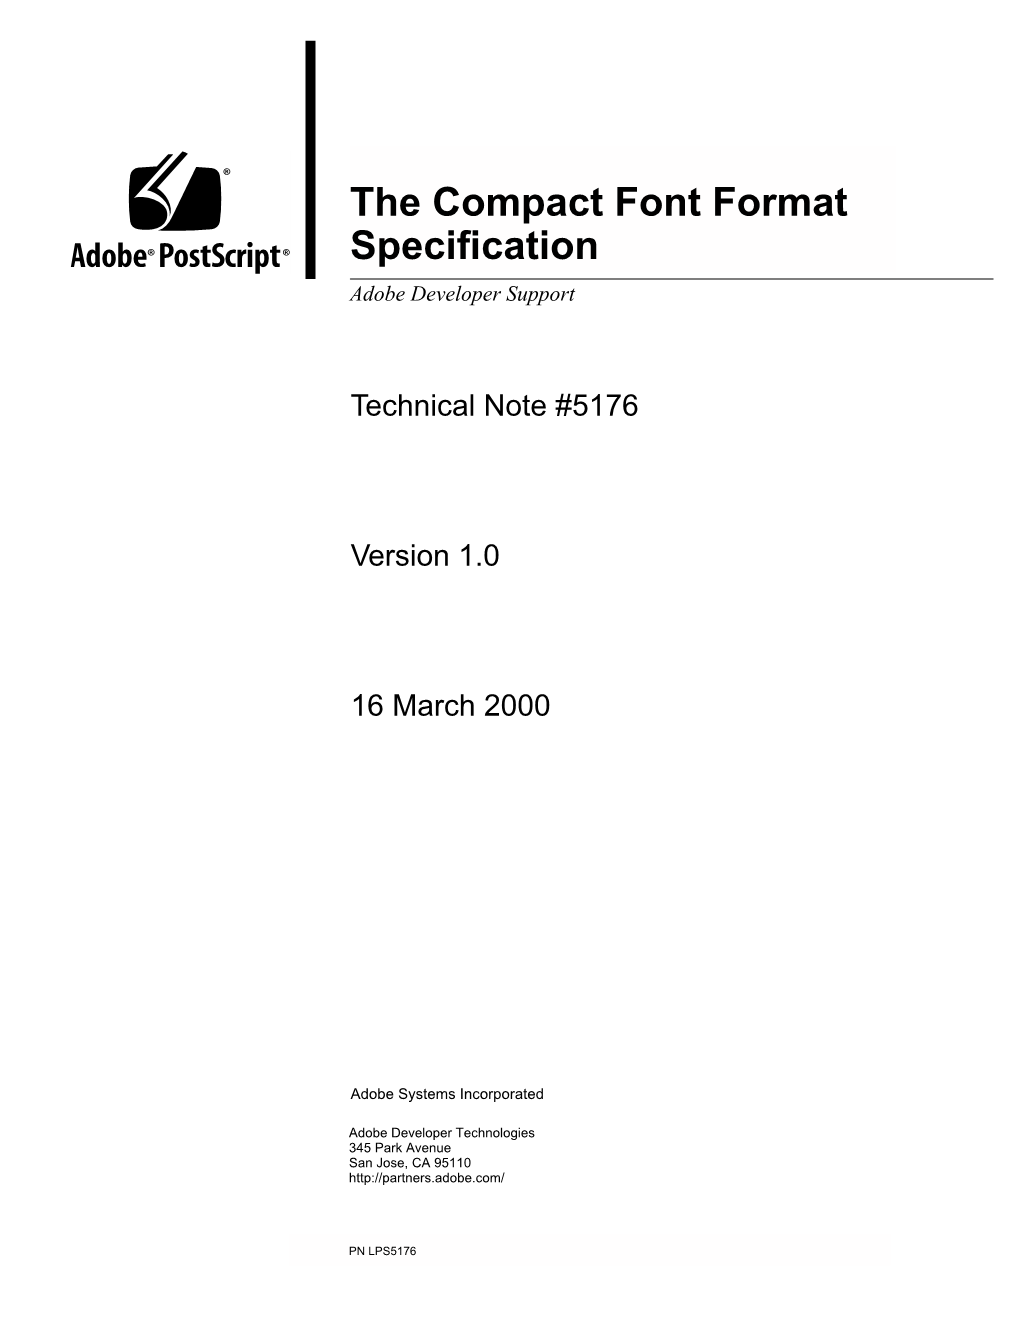 The Compact Font Format Specfication